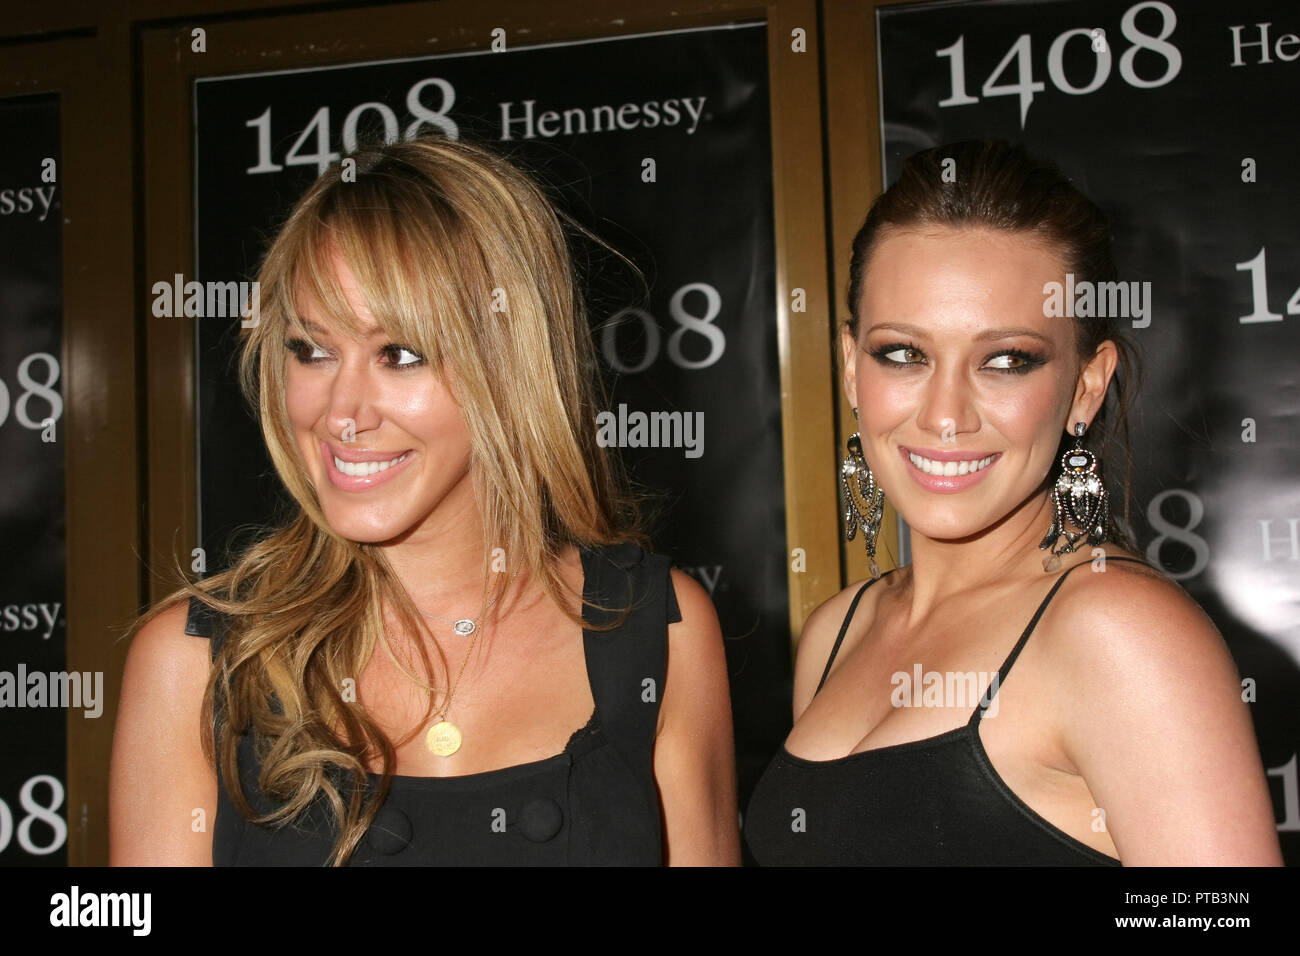 Haylie Duff, Hilary Duff  06/12/07 '1408' Premiere  @ The National Theatre, Westwood Photo by Ima Kuroda/HNW / PictureLux  File Reference # 33680 272HNW Stock Photo